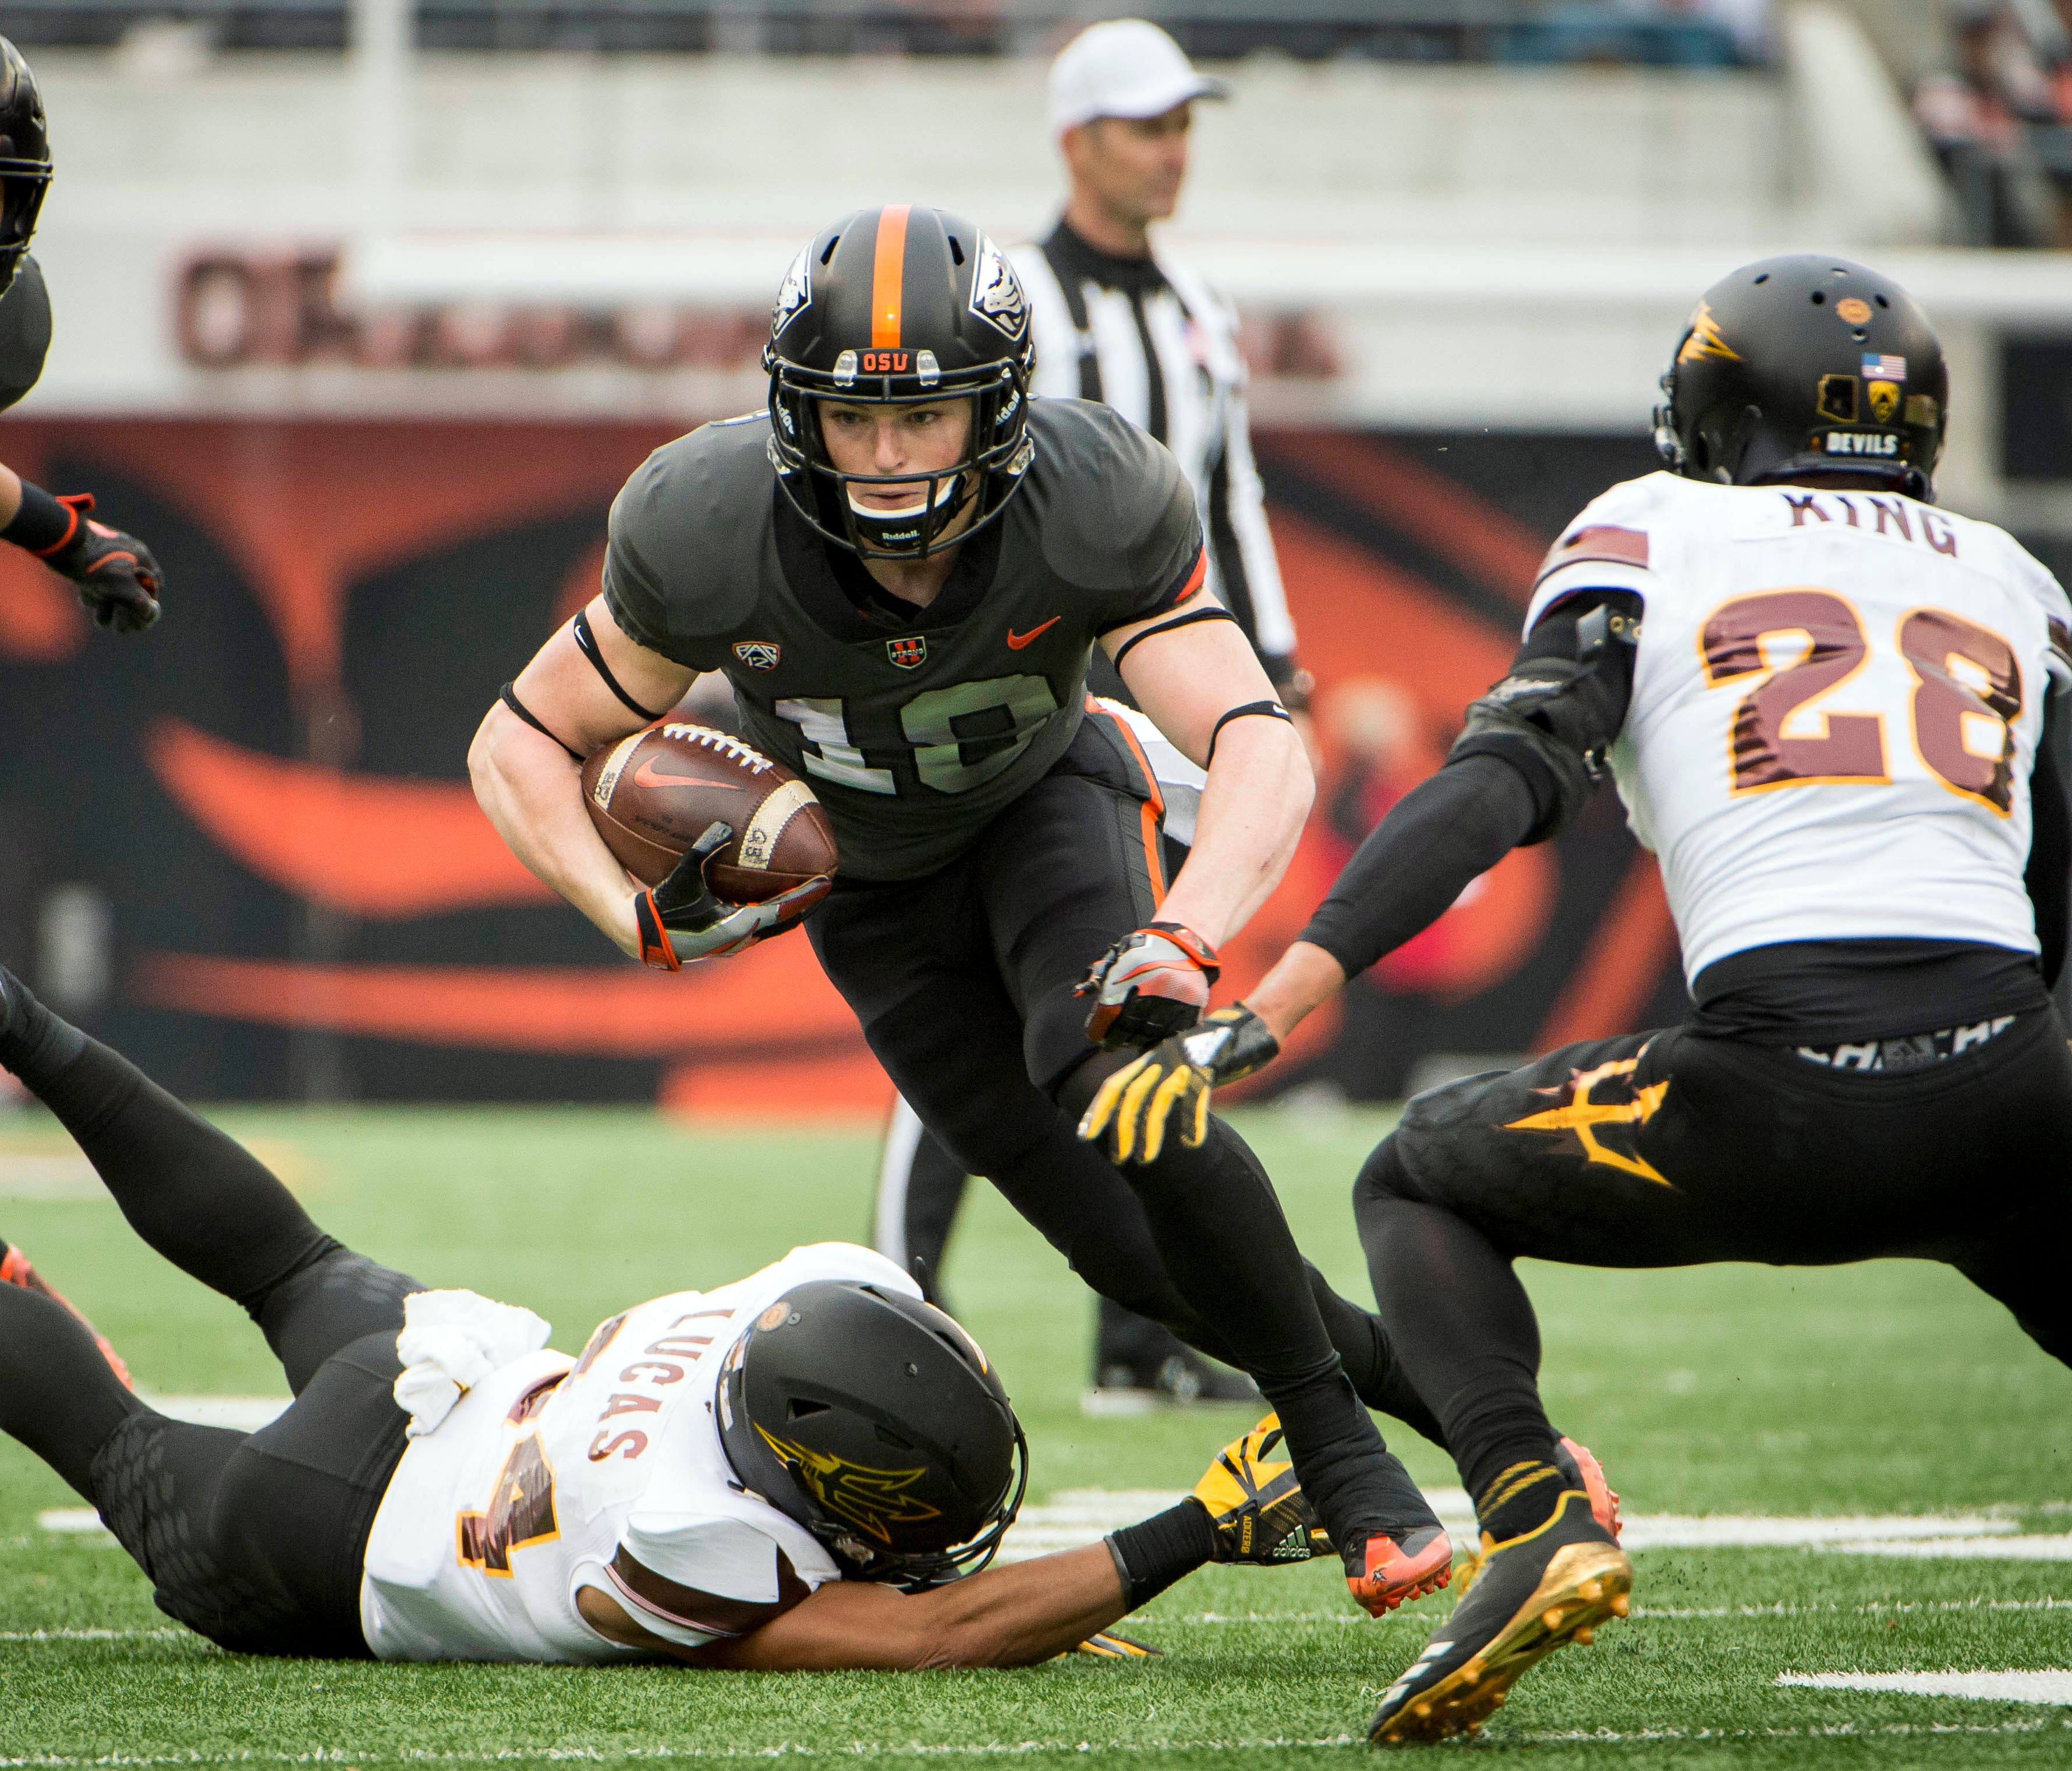 Oregon State wide receiver Timmy Hernandez tries to find running room against Arizona State during their game in 2017.